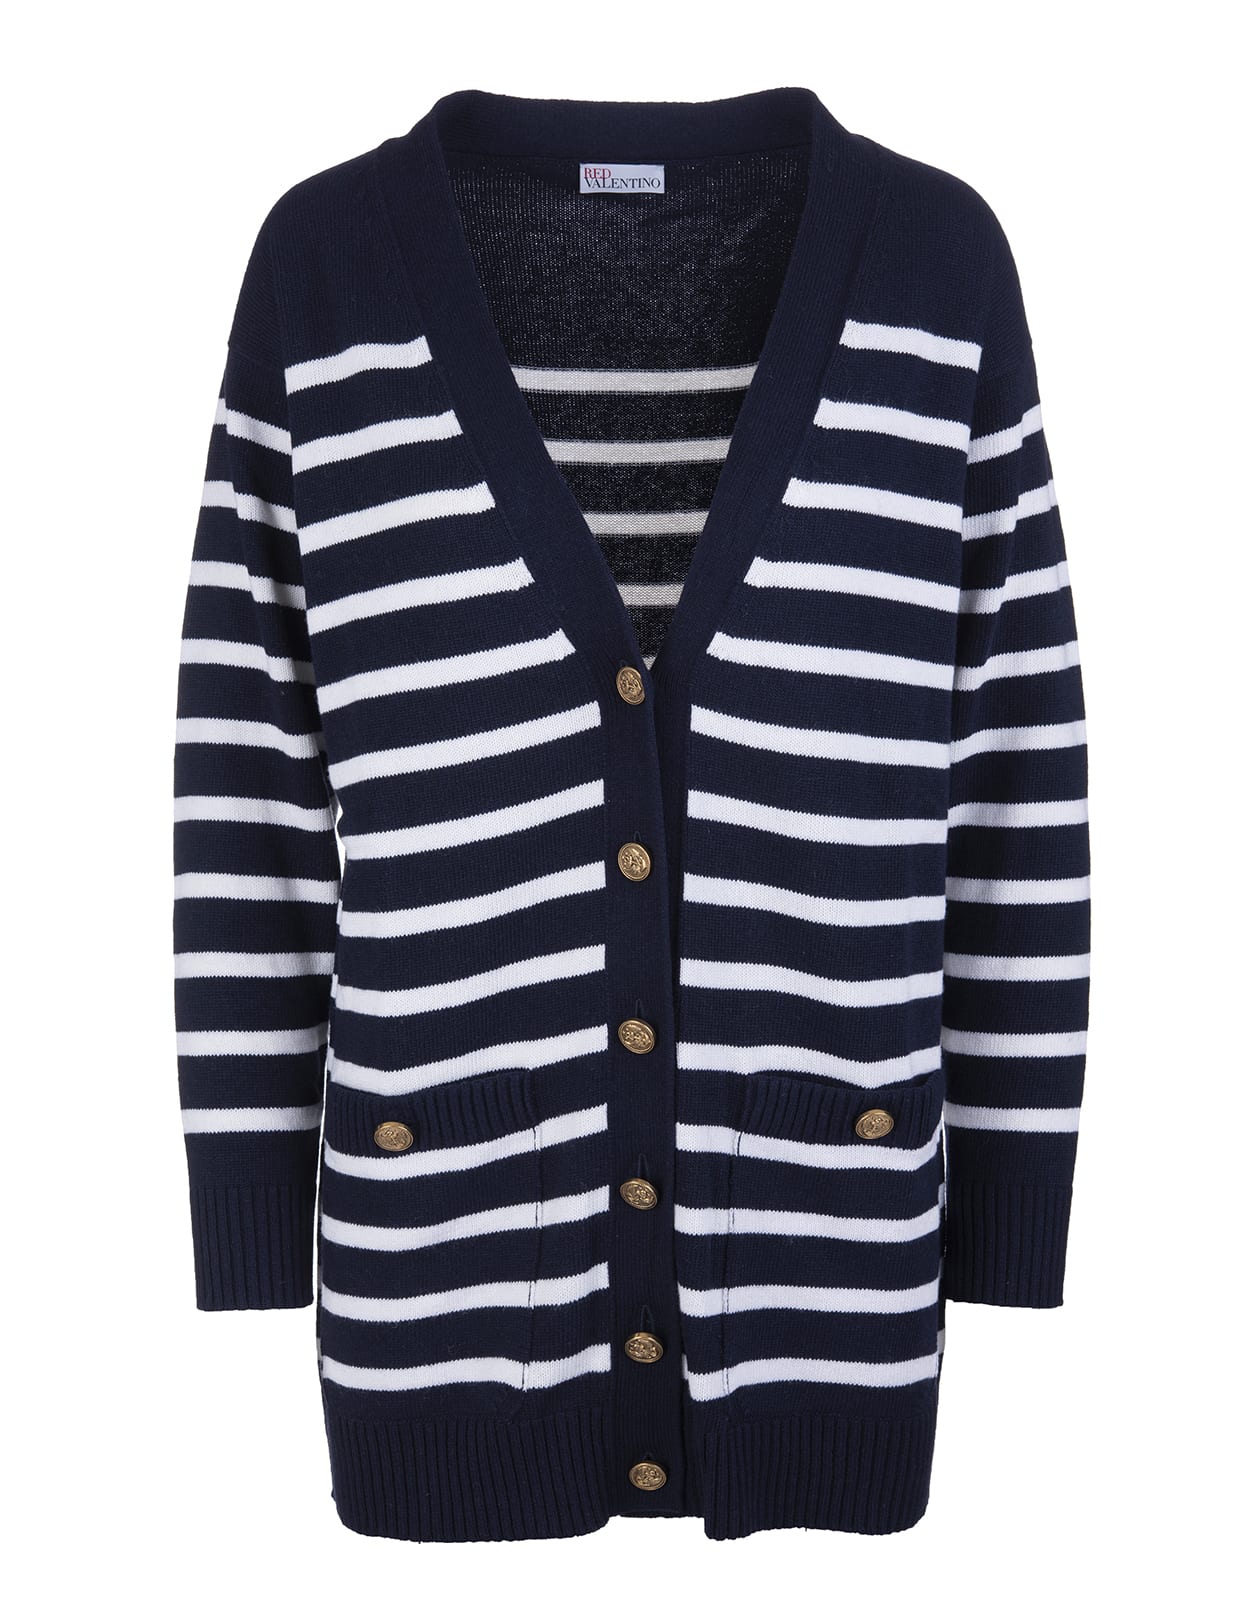 RED Valentino Woman Maxi Cardigan In Striped White And Navy Blue Wool Blend